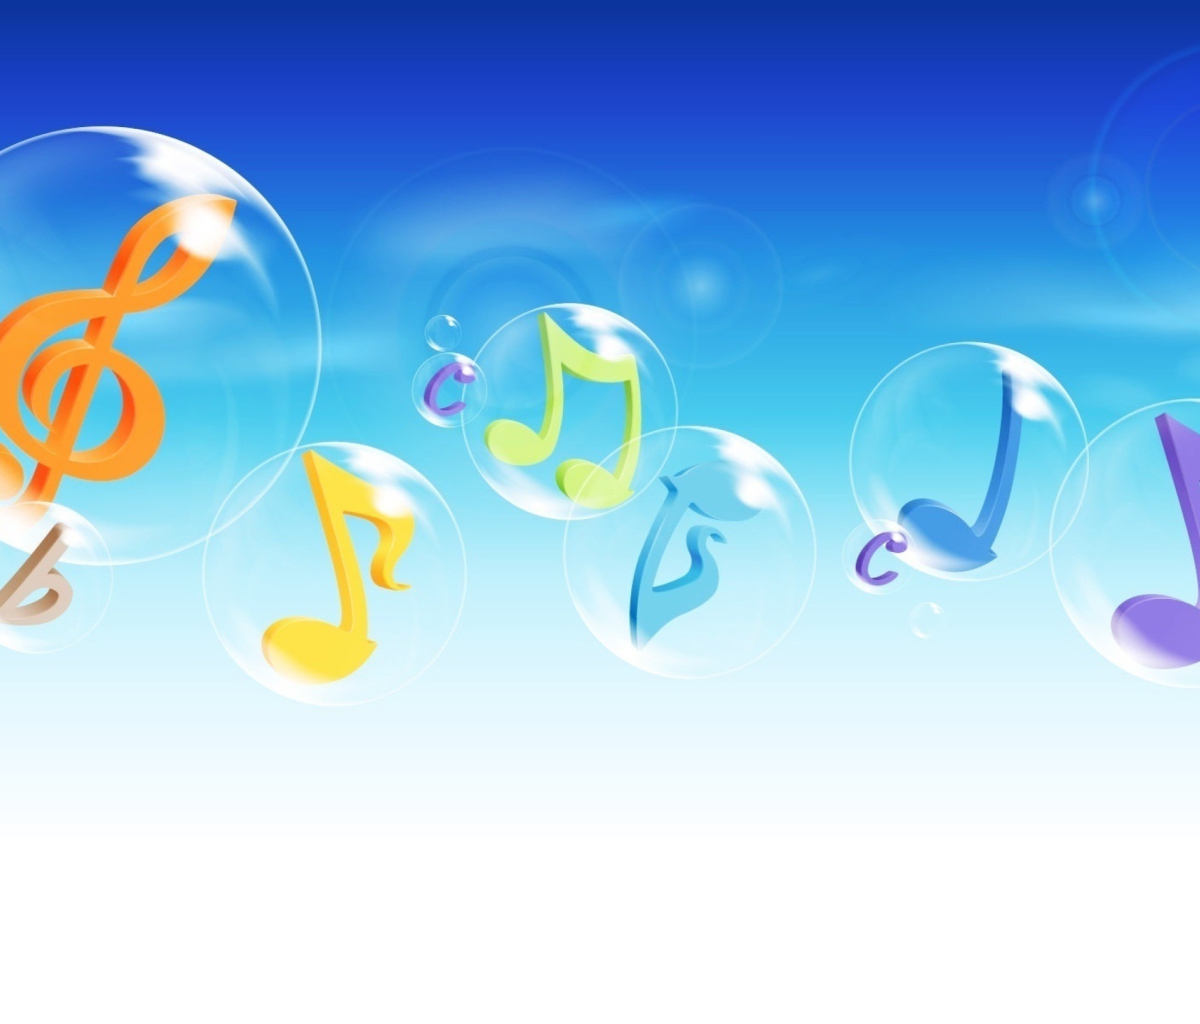 Musical Notes In Bubbles screenshot #1 1200x1024